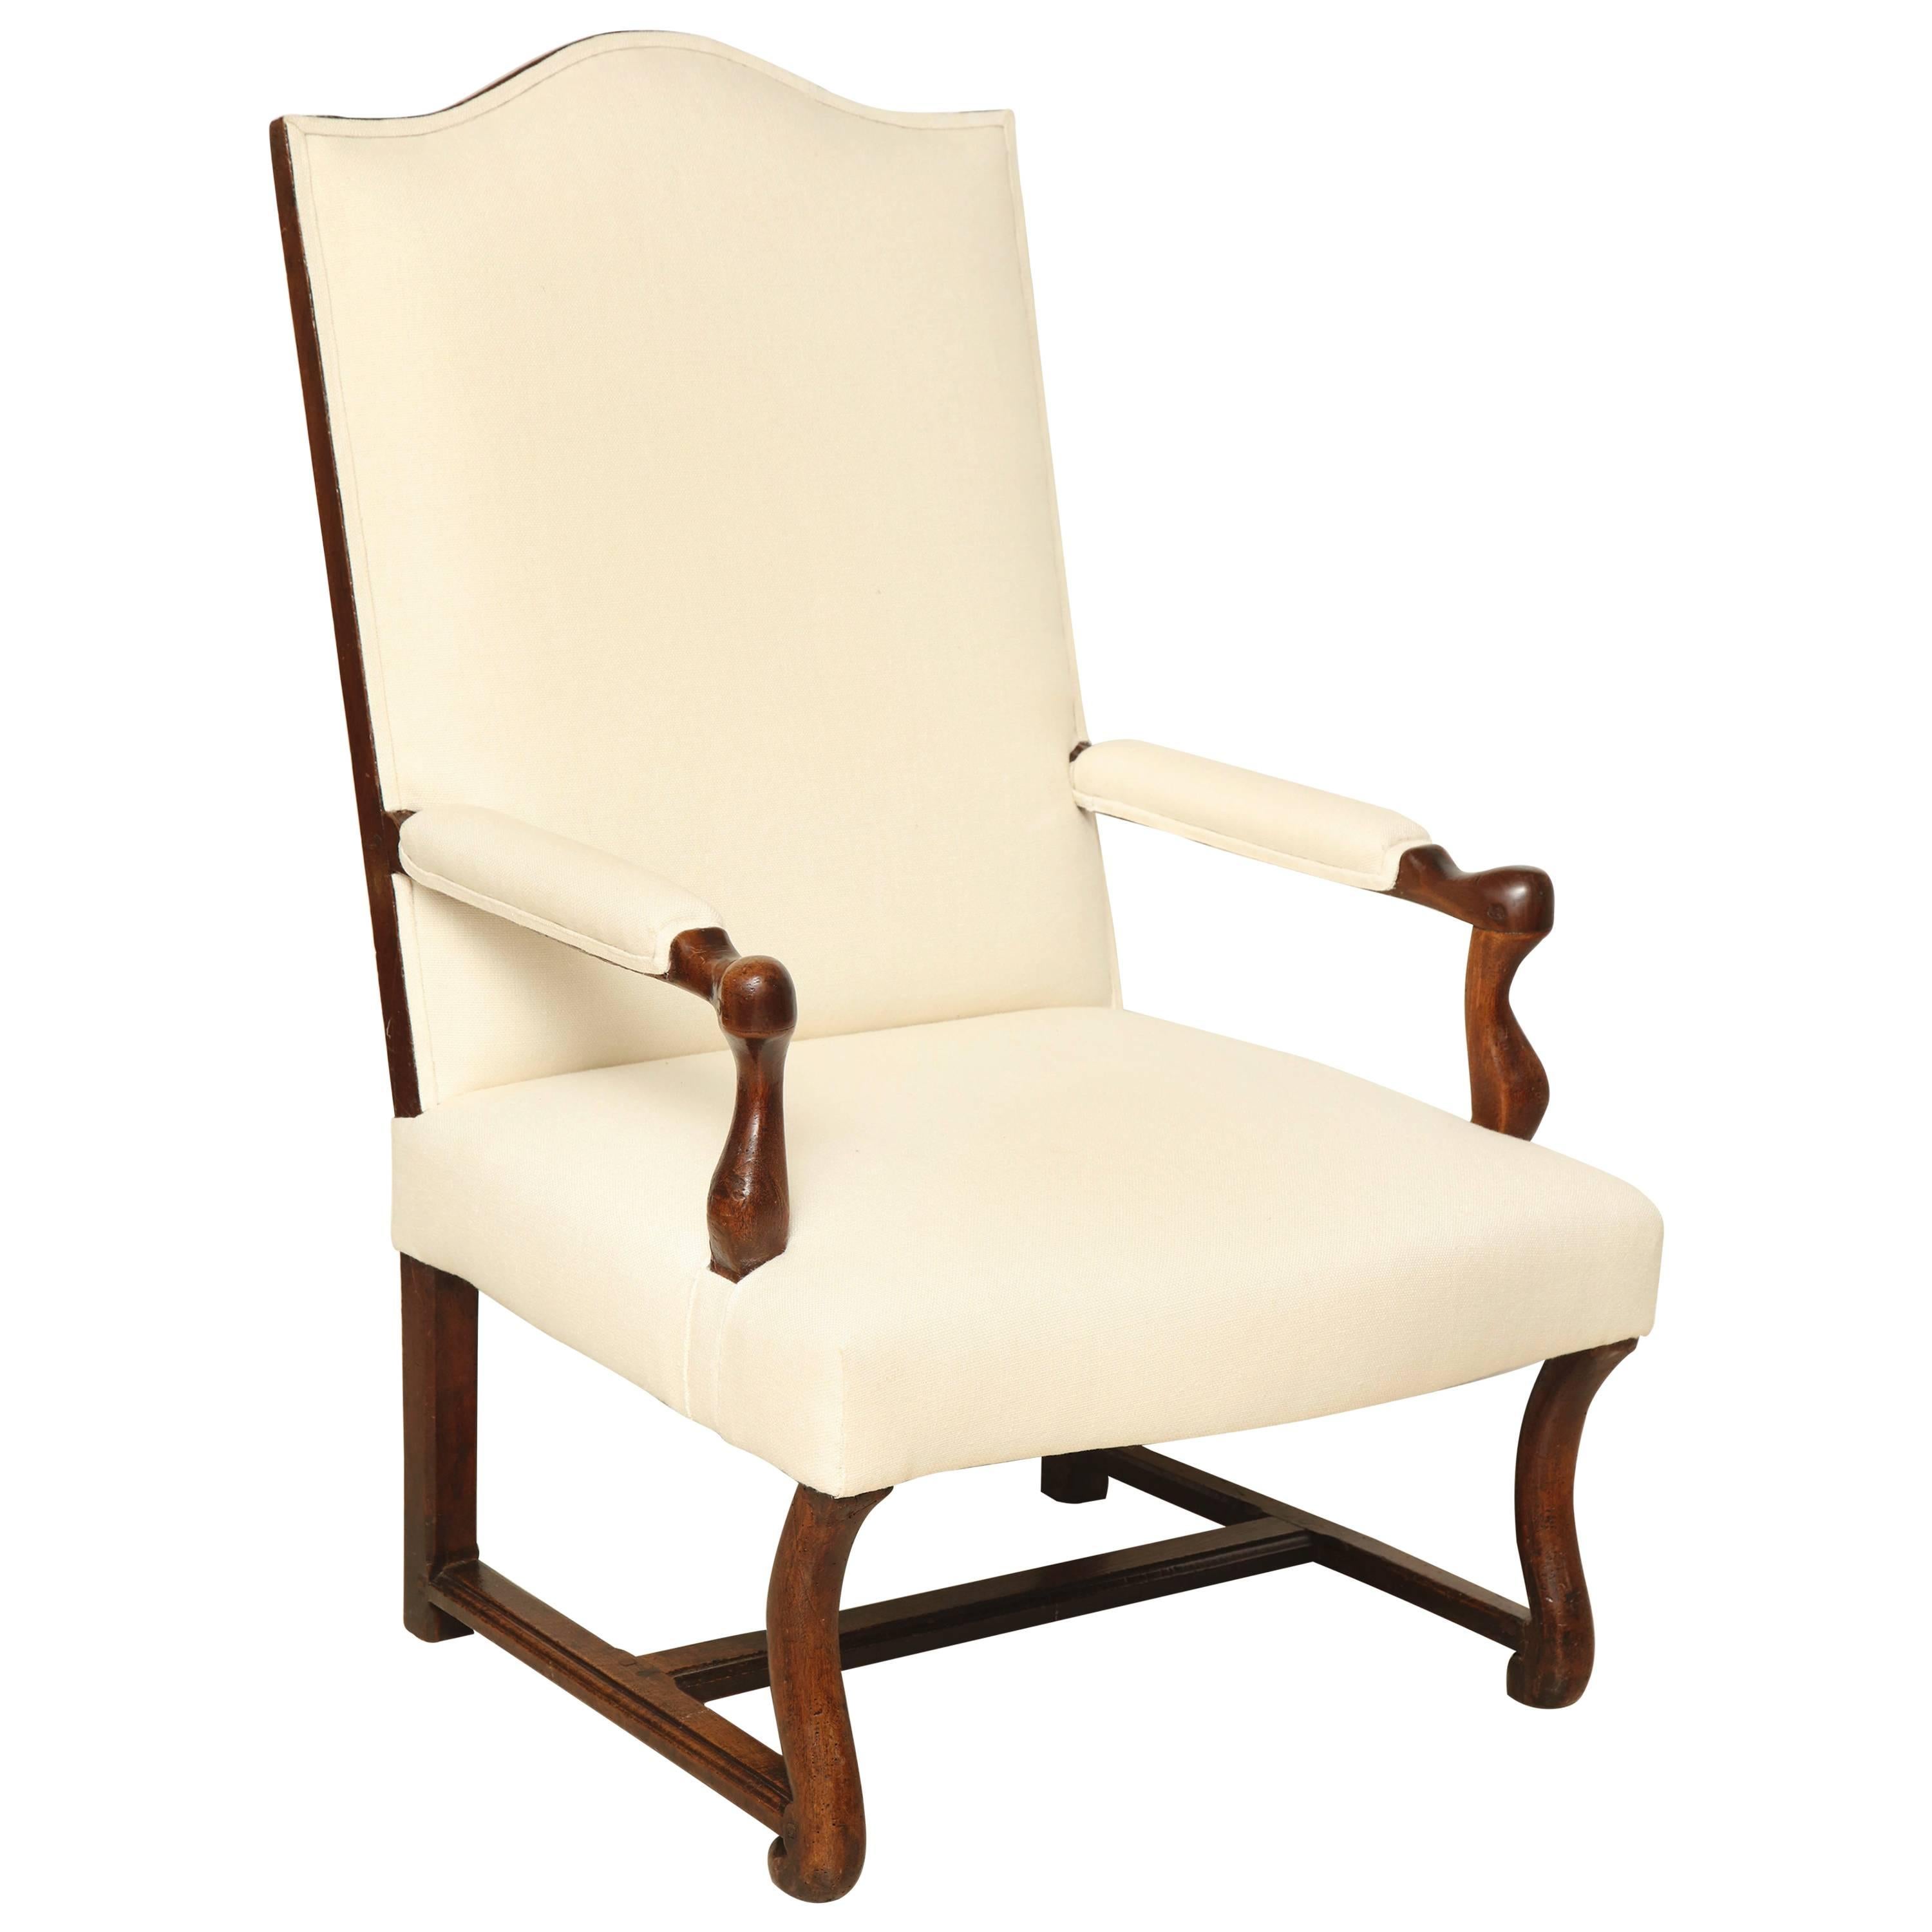 French Walnut Louis XIV Armchair Upholstered in Ivory Linen, France, circa 1770